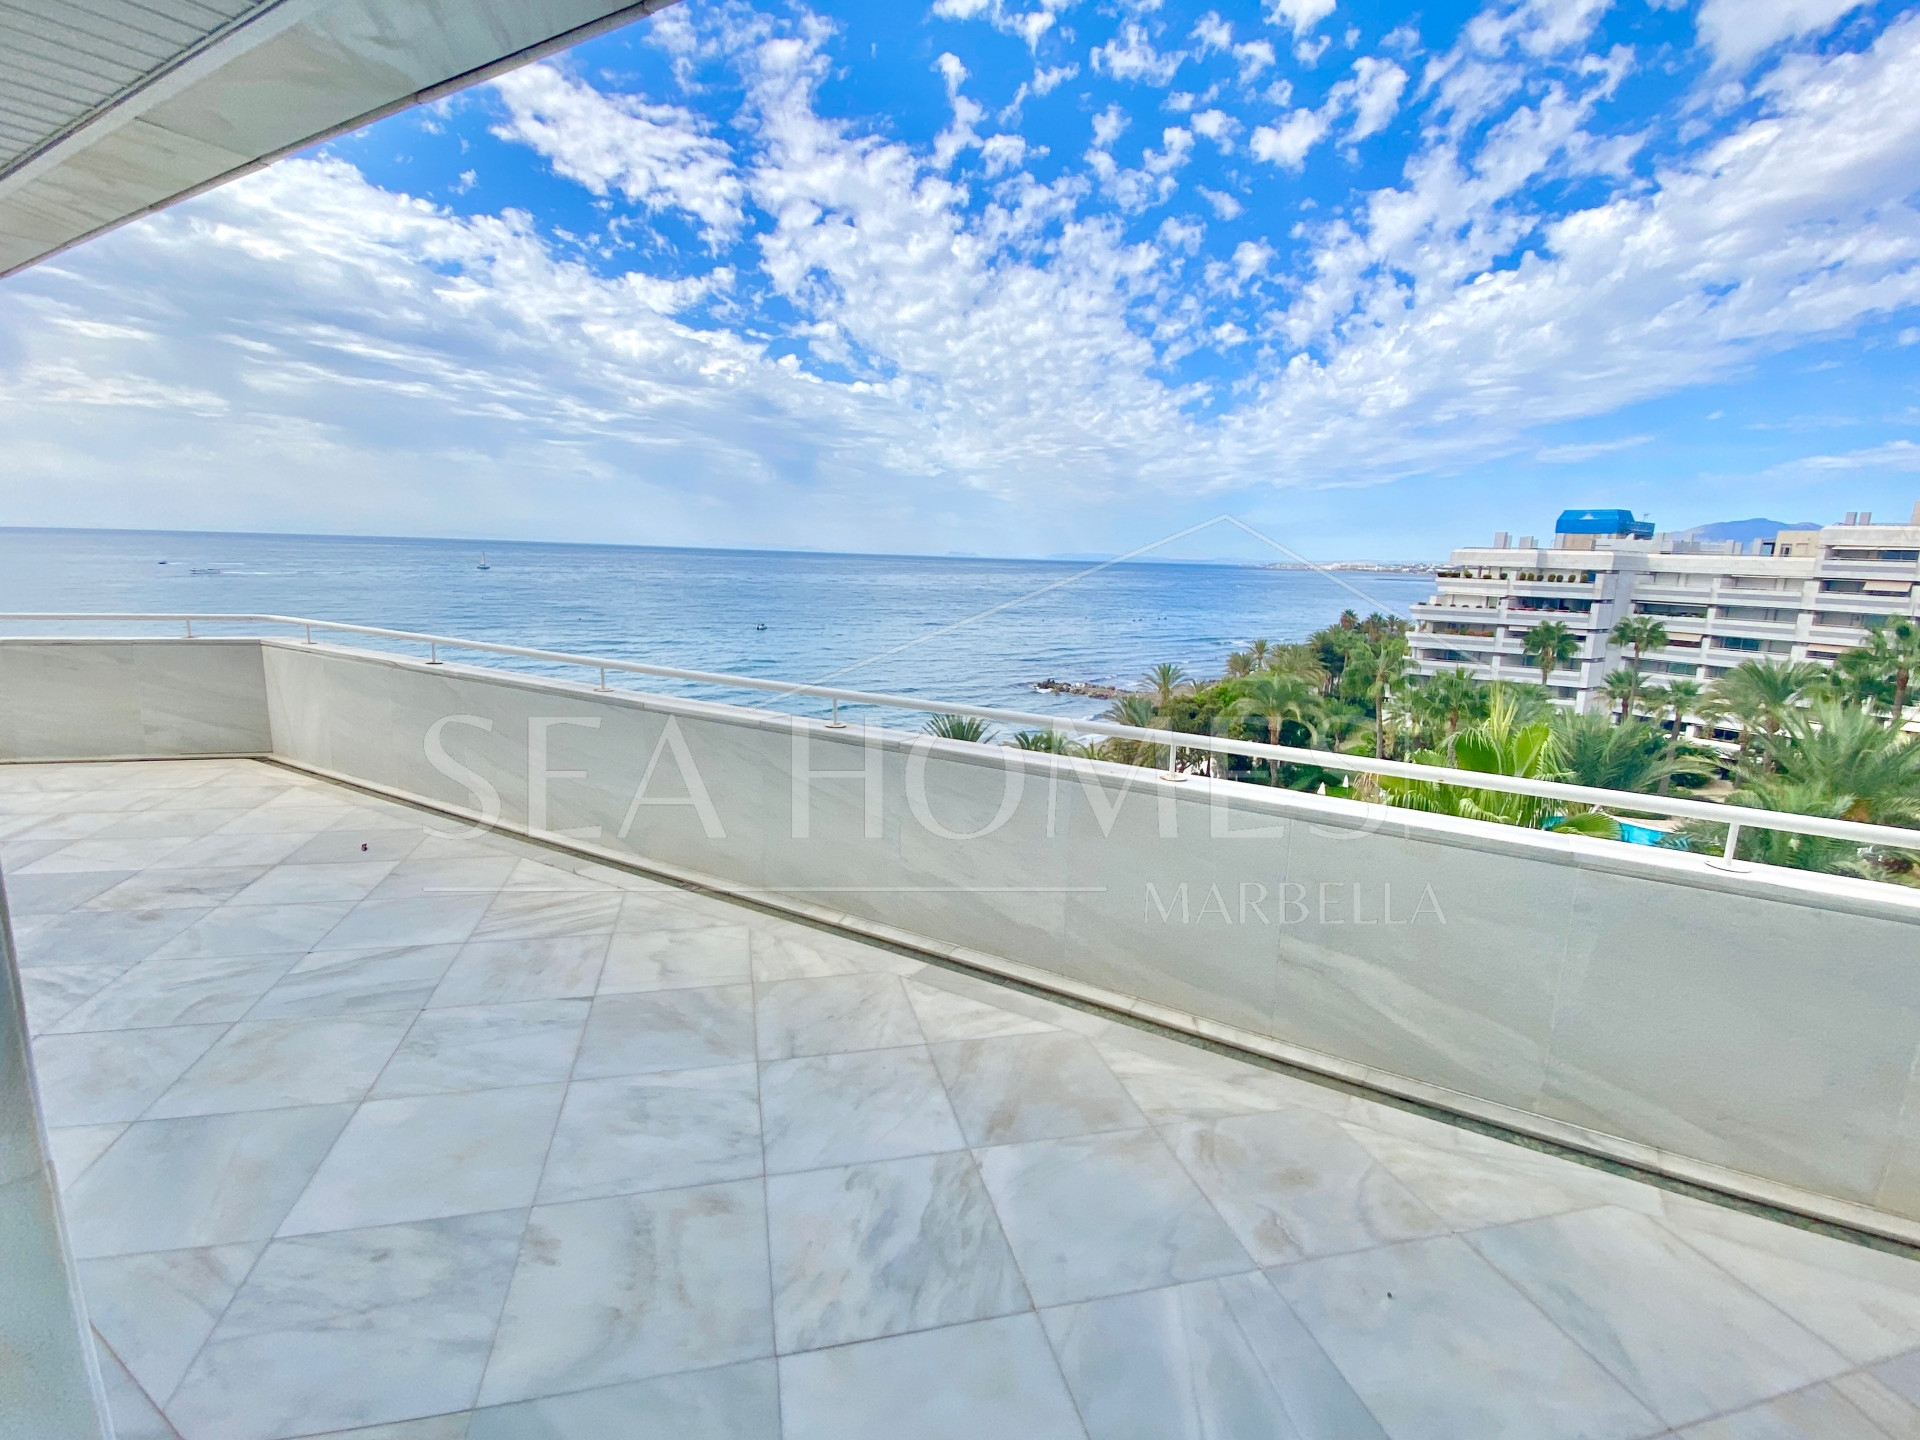 Exclusive apartment for rent at Mare Nostrum with unbeatable sea views